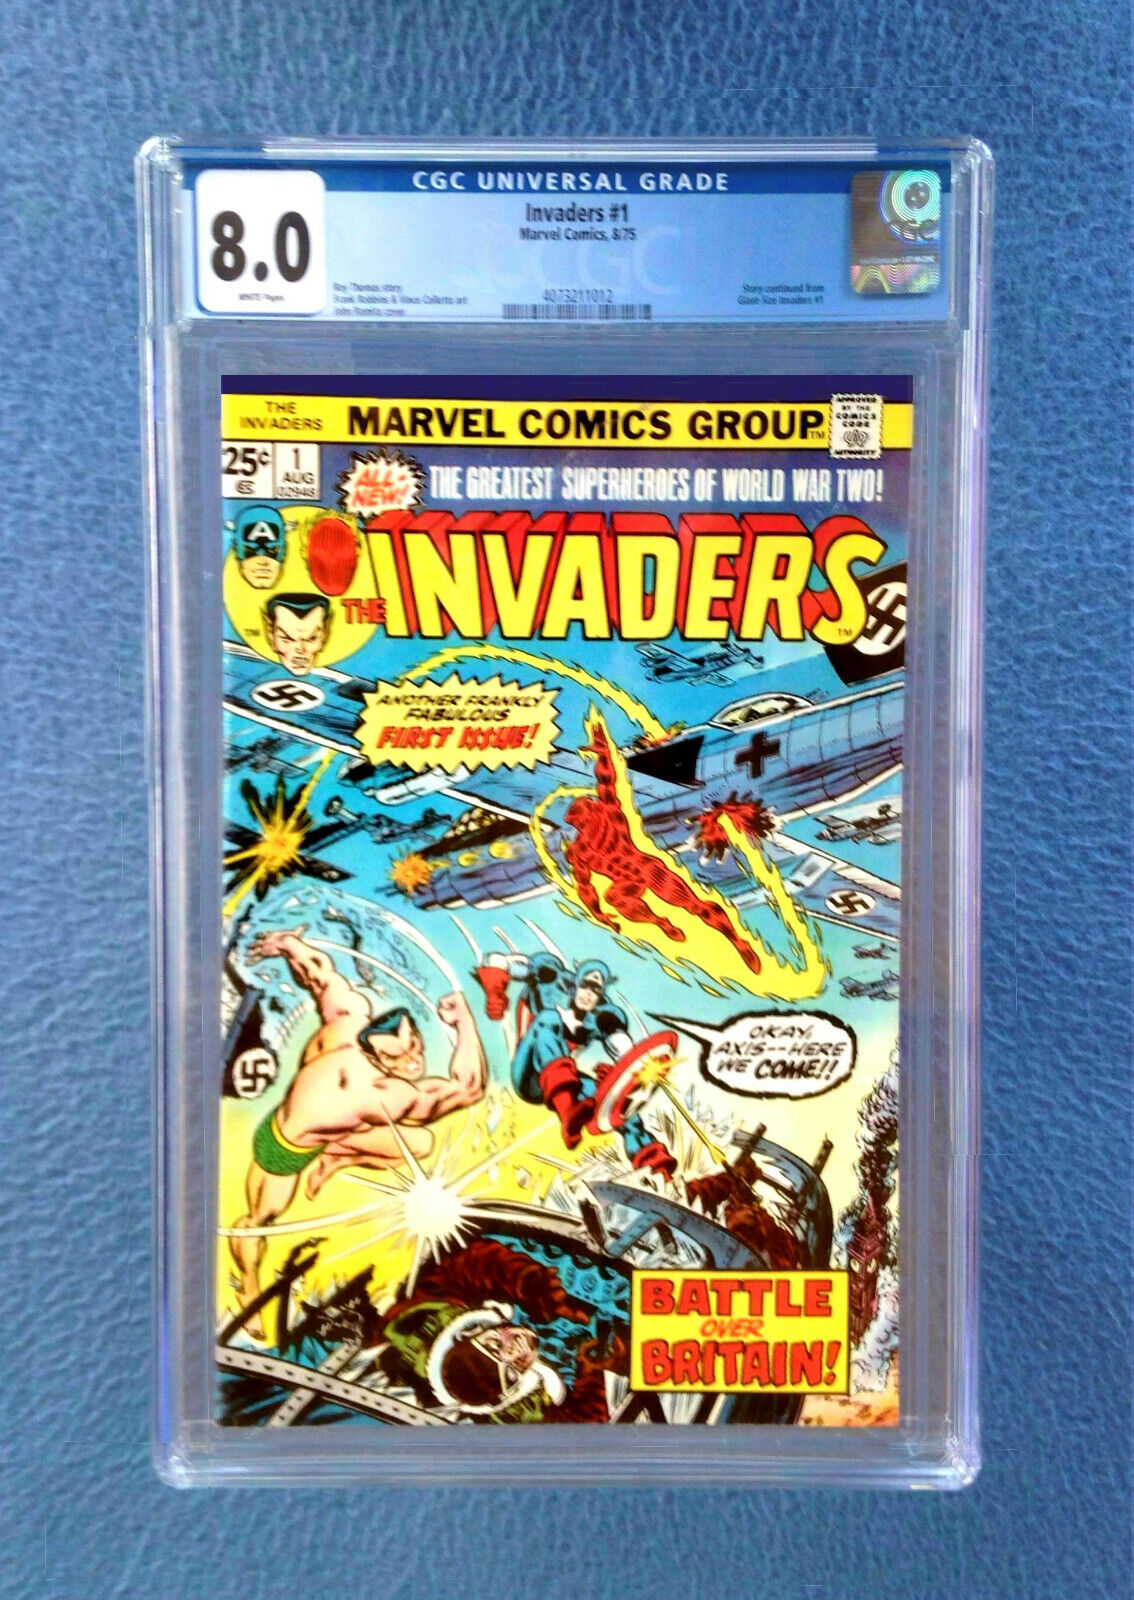 INVADERS #1 CGC 8.0 VERY FINE WHITE PAGES MARVEL COMICS JOHN ROMITA COVER WWII